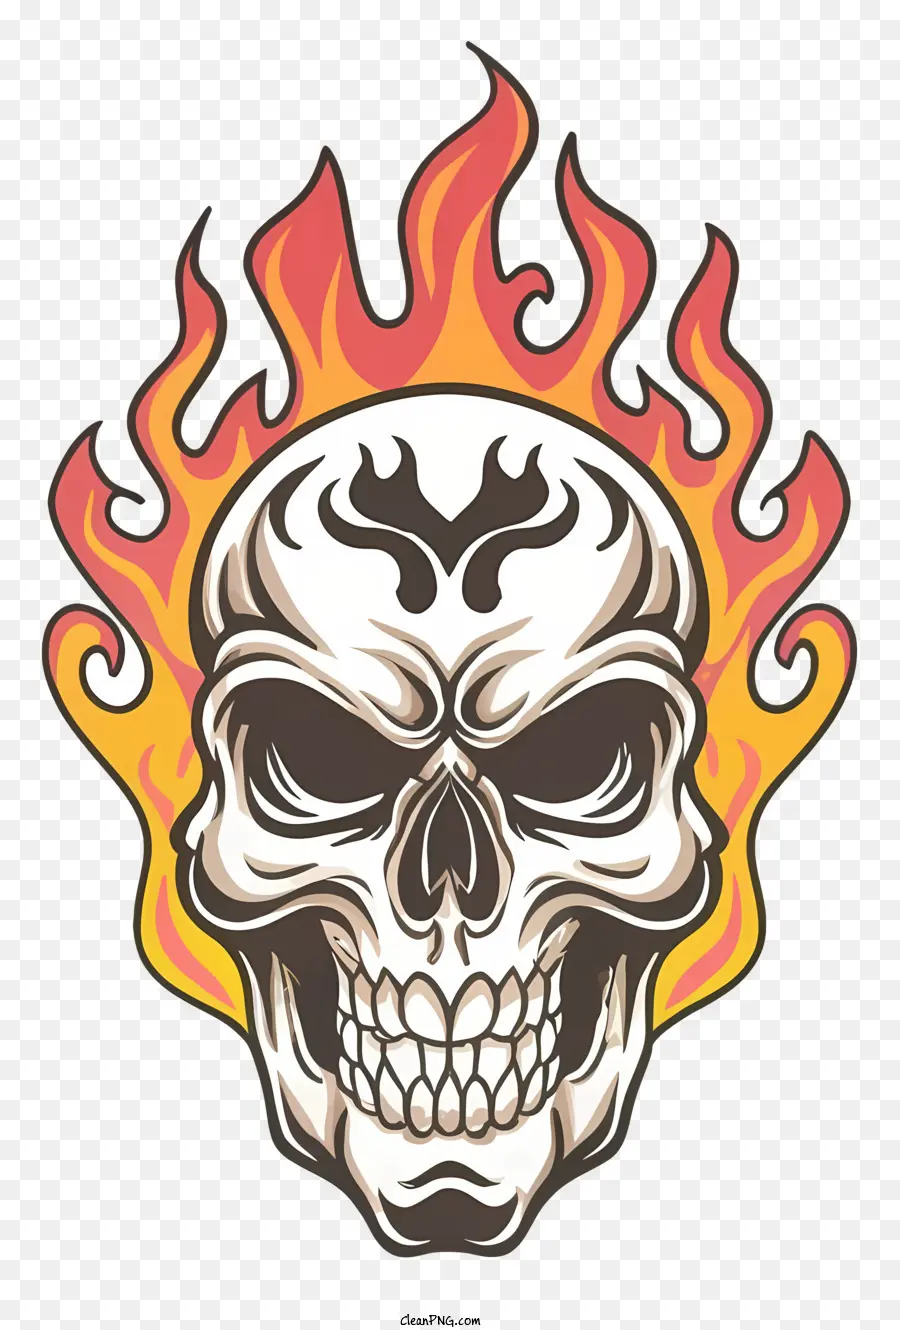 skull with flames death and destruction life and rebirth dark and intense image symbolism of skull and flames